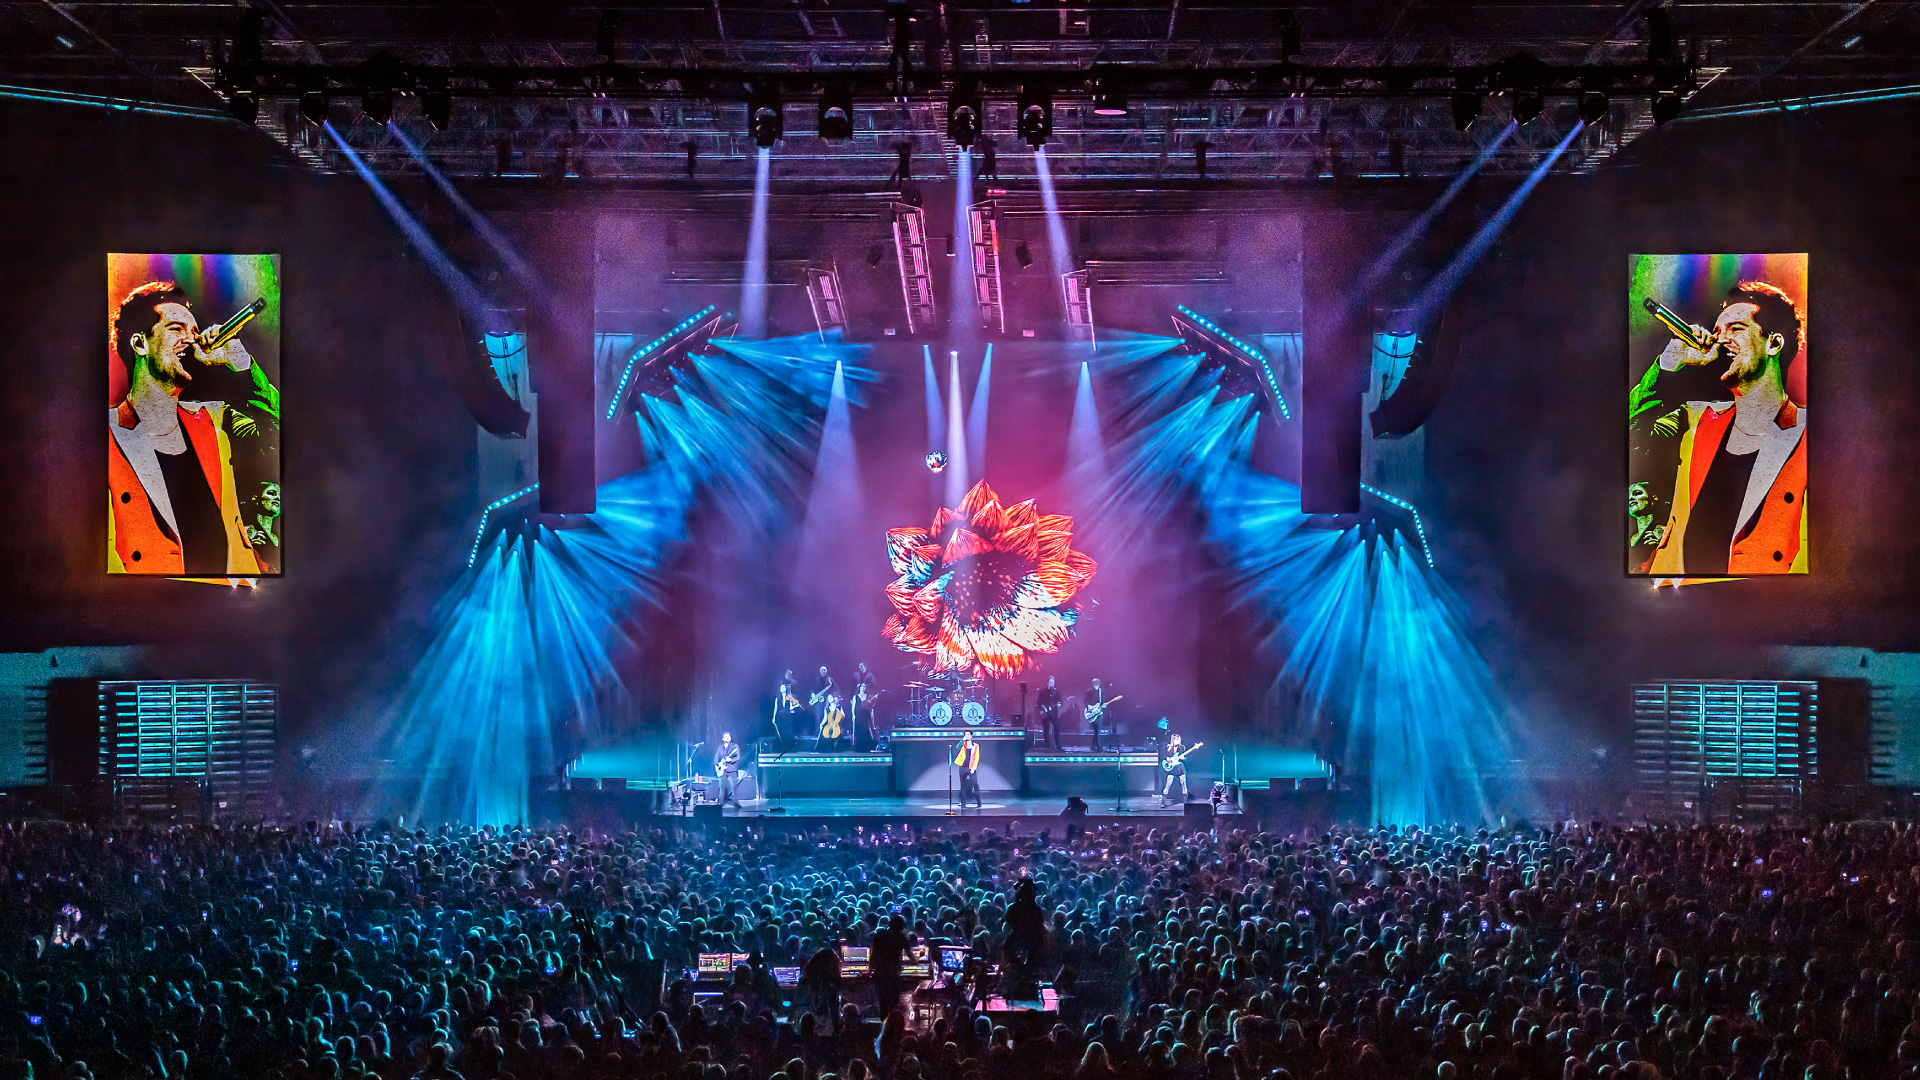 PRG UK has provided the lighting equipment and crew for this beautifully colourful show across the UK and EU of Panic at the Disco!